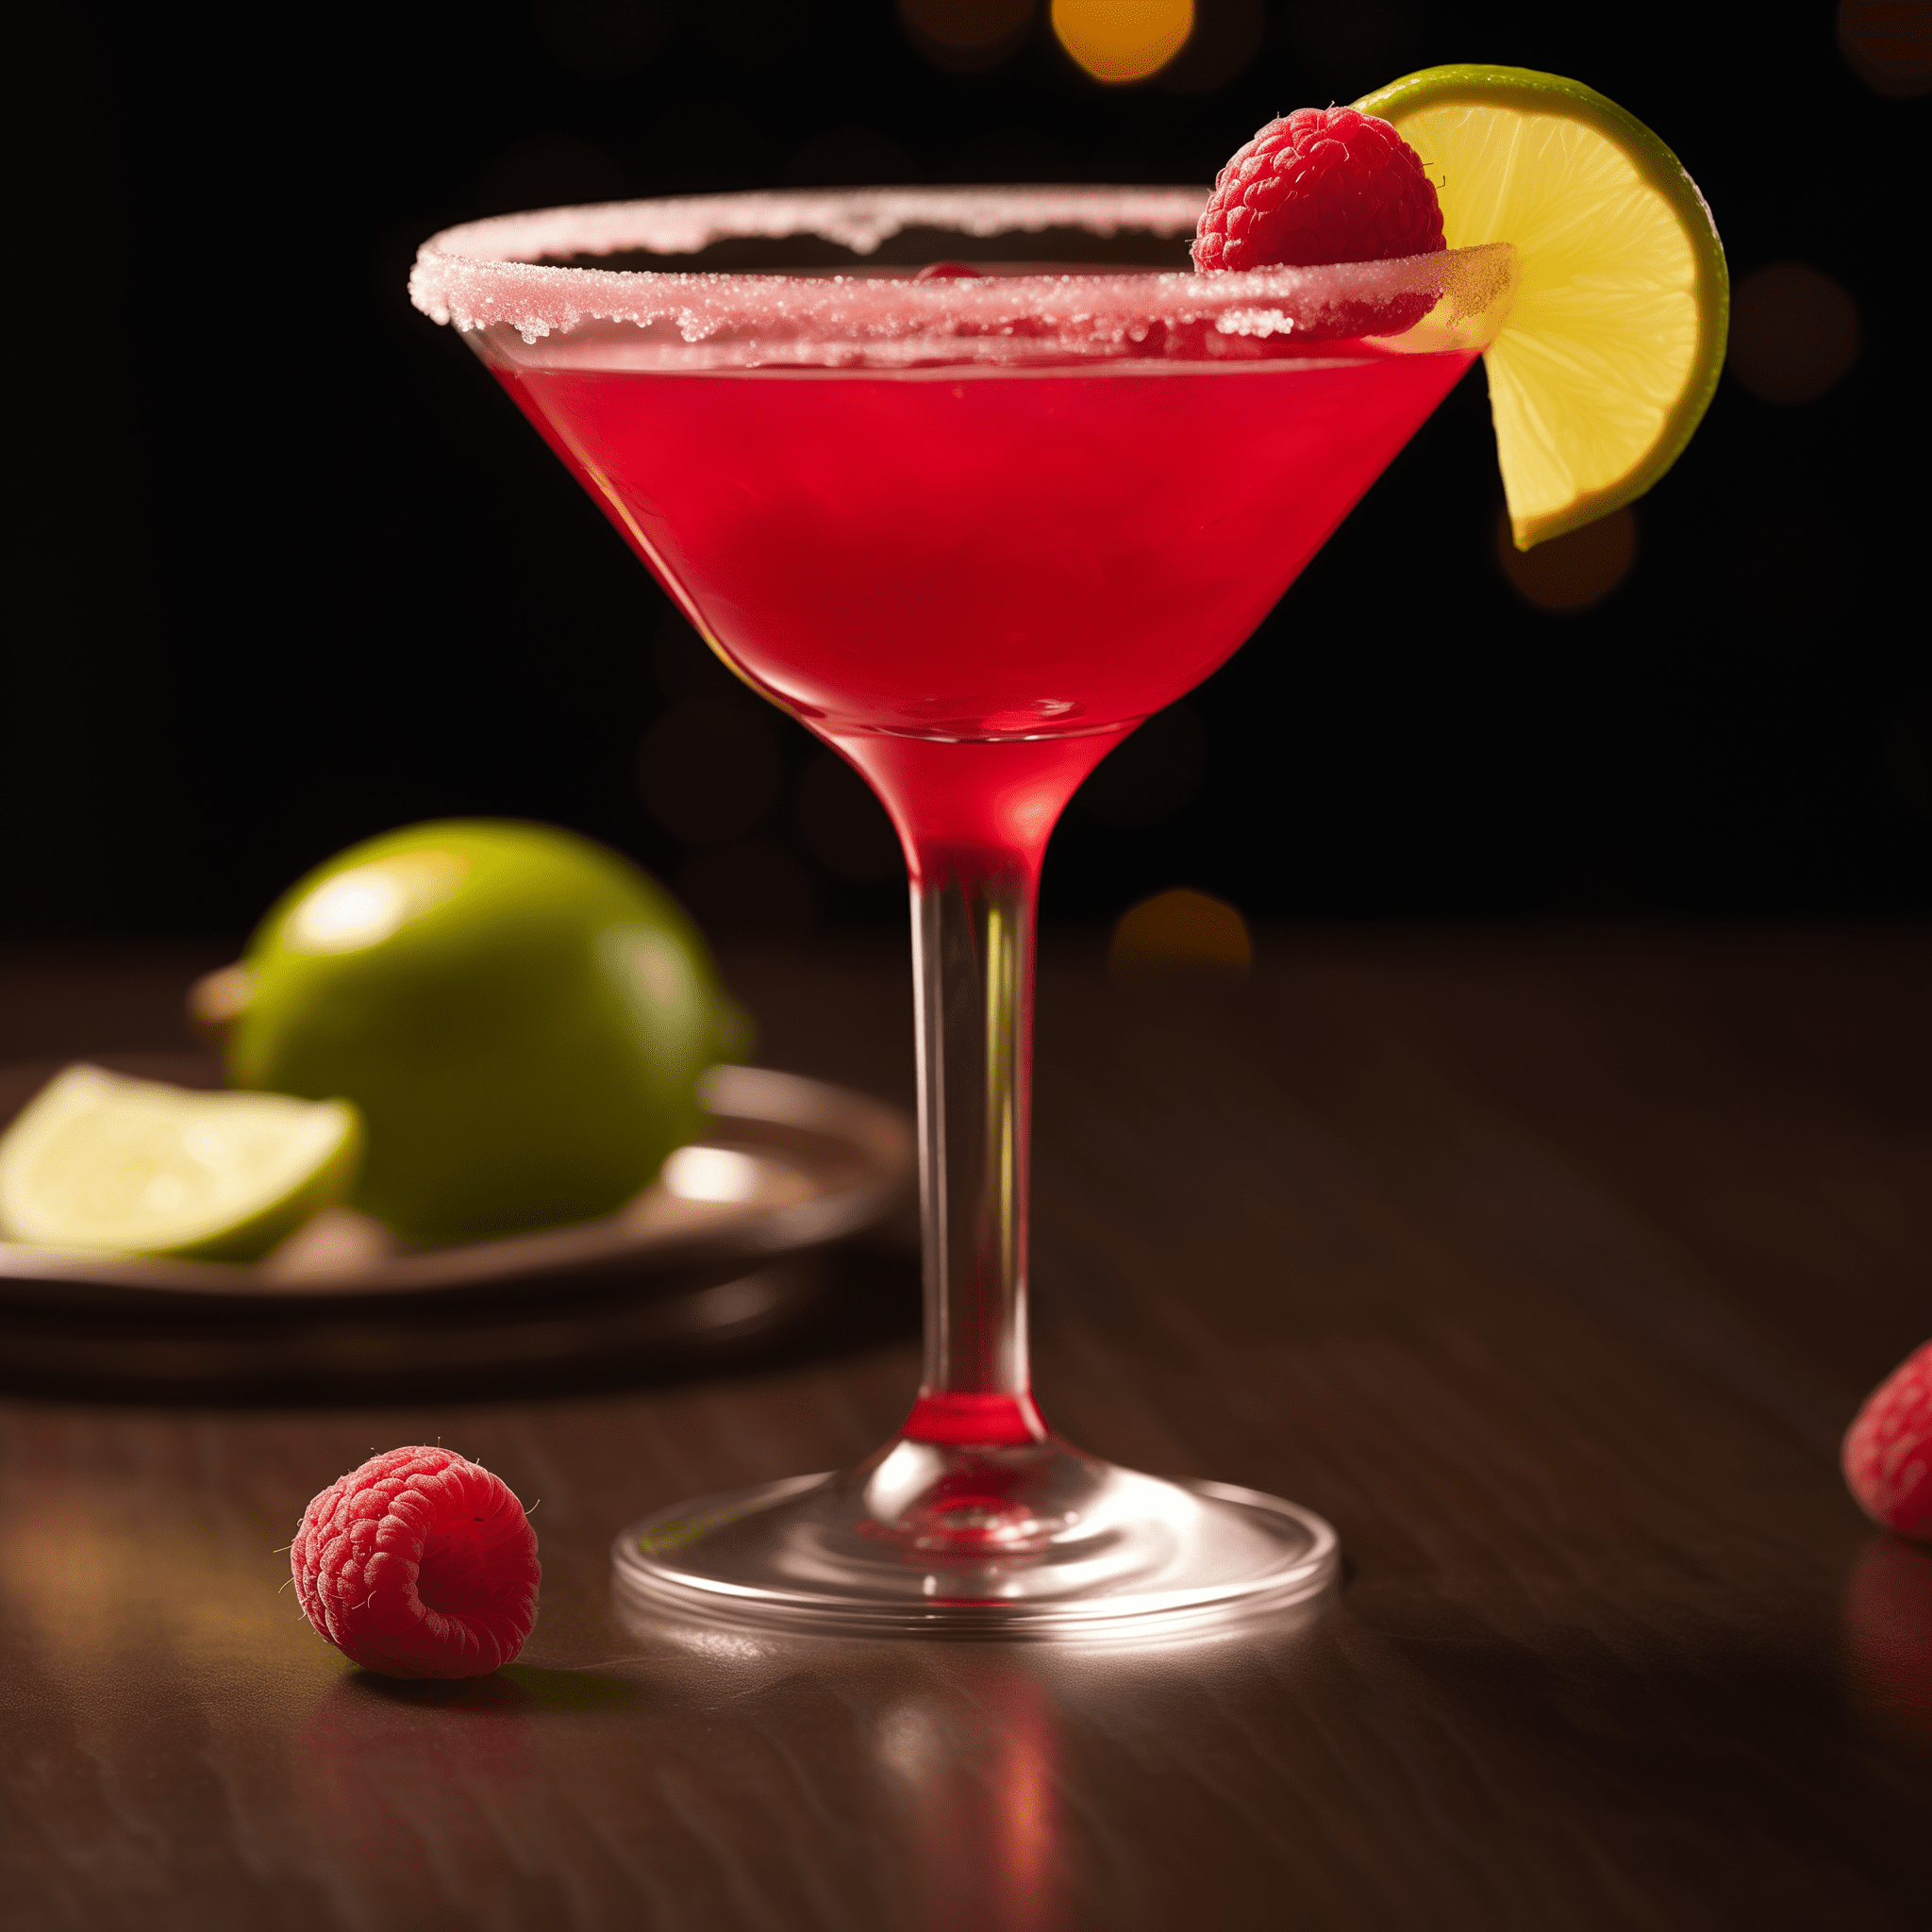 Blackjack Margarita Cocktail Recipe - The Blackjack Margarita offers a delightful balance of flavors. The tequila provides a robust foundation, while the triple sec adds a hint of citrus sweetness. The raspberry liqueur introduces a fruity and slightly tangy note, and the lime juice ties everything together with its refreshing acidity. Overall, it's a harmonious blend that's both bold and invigorating.